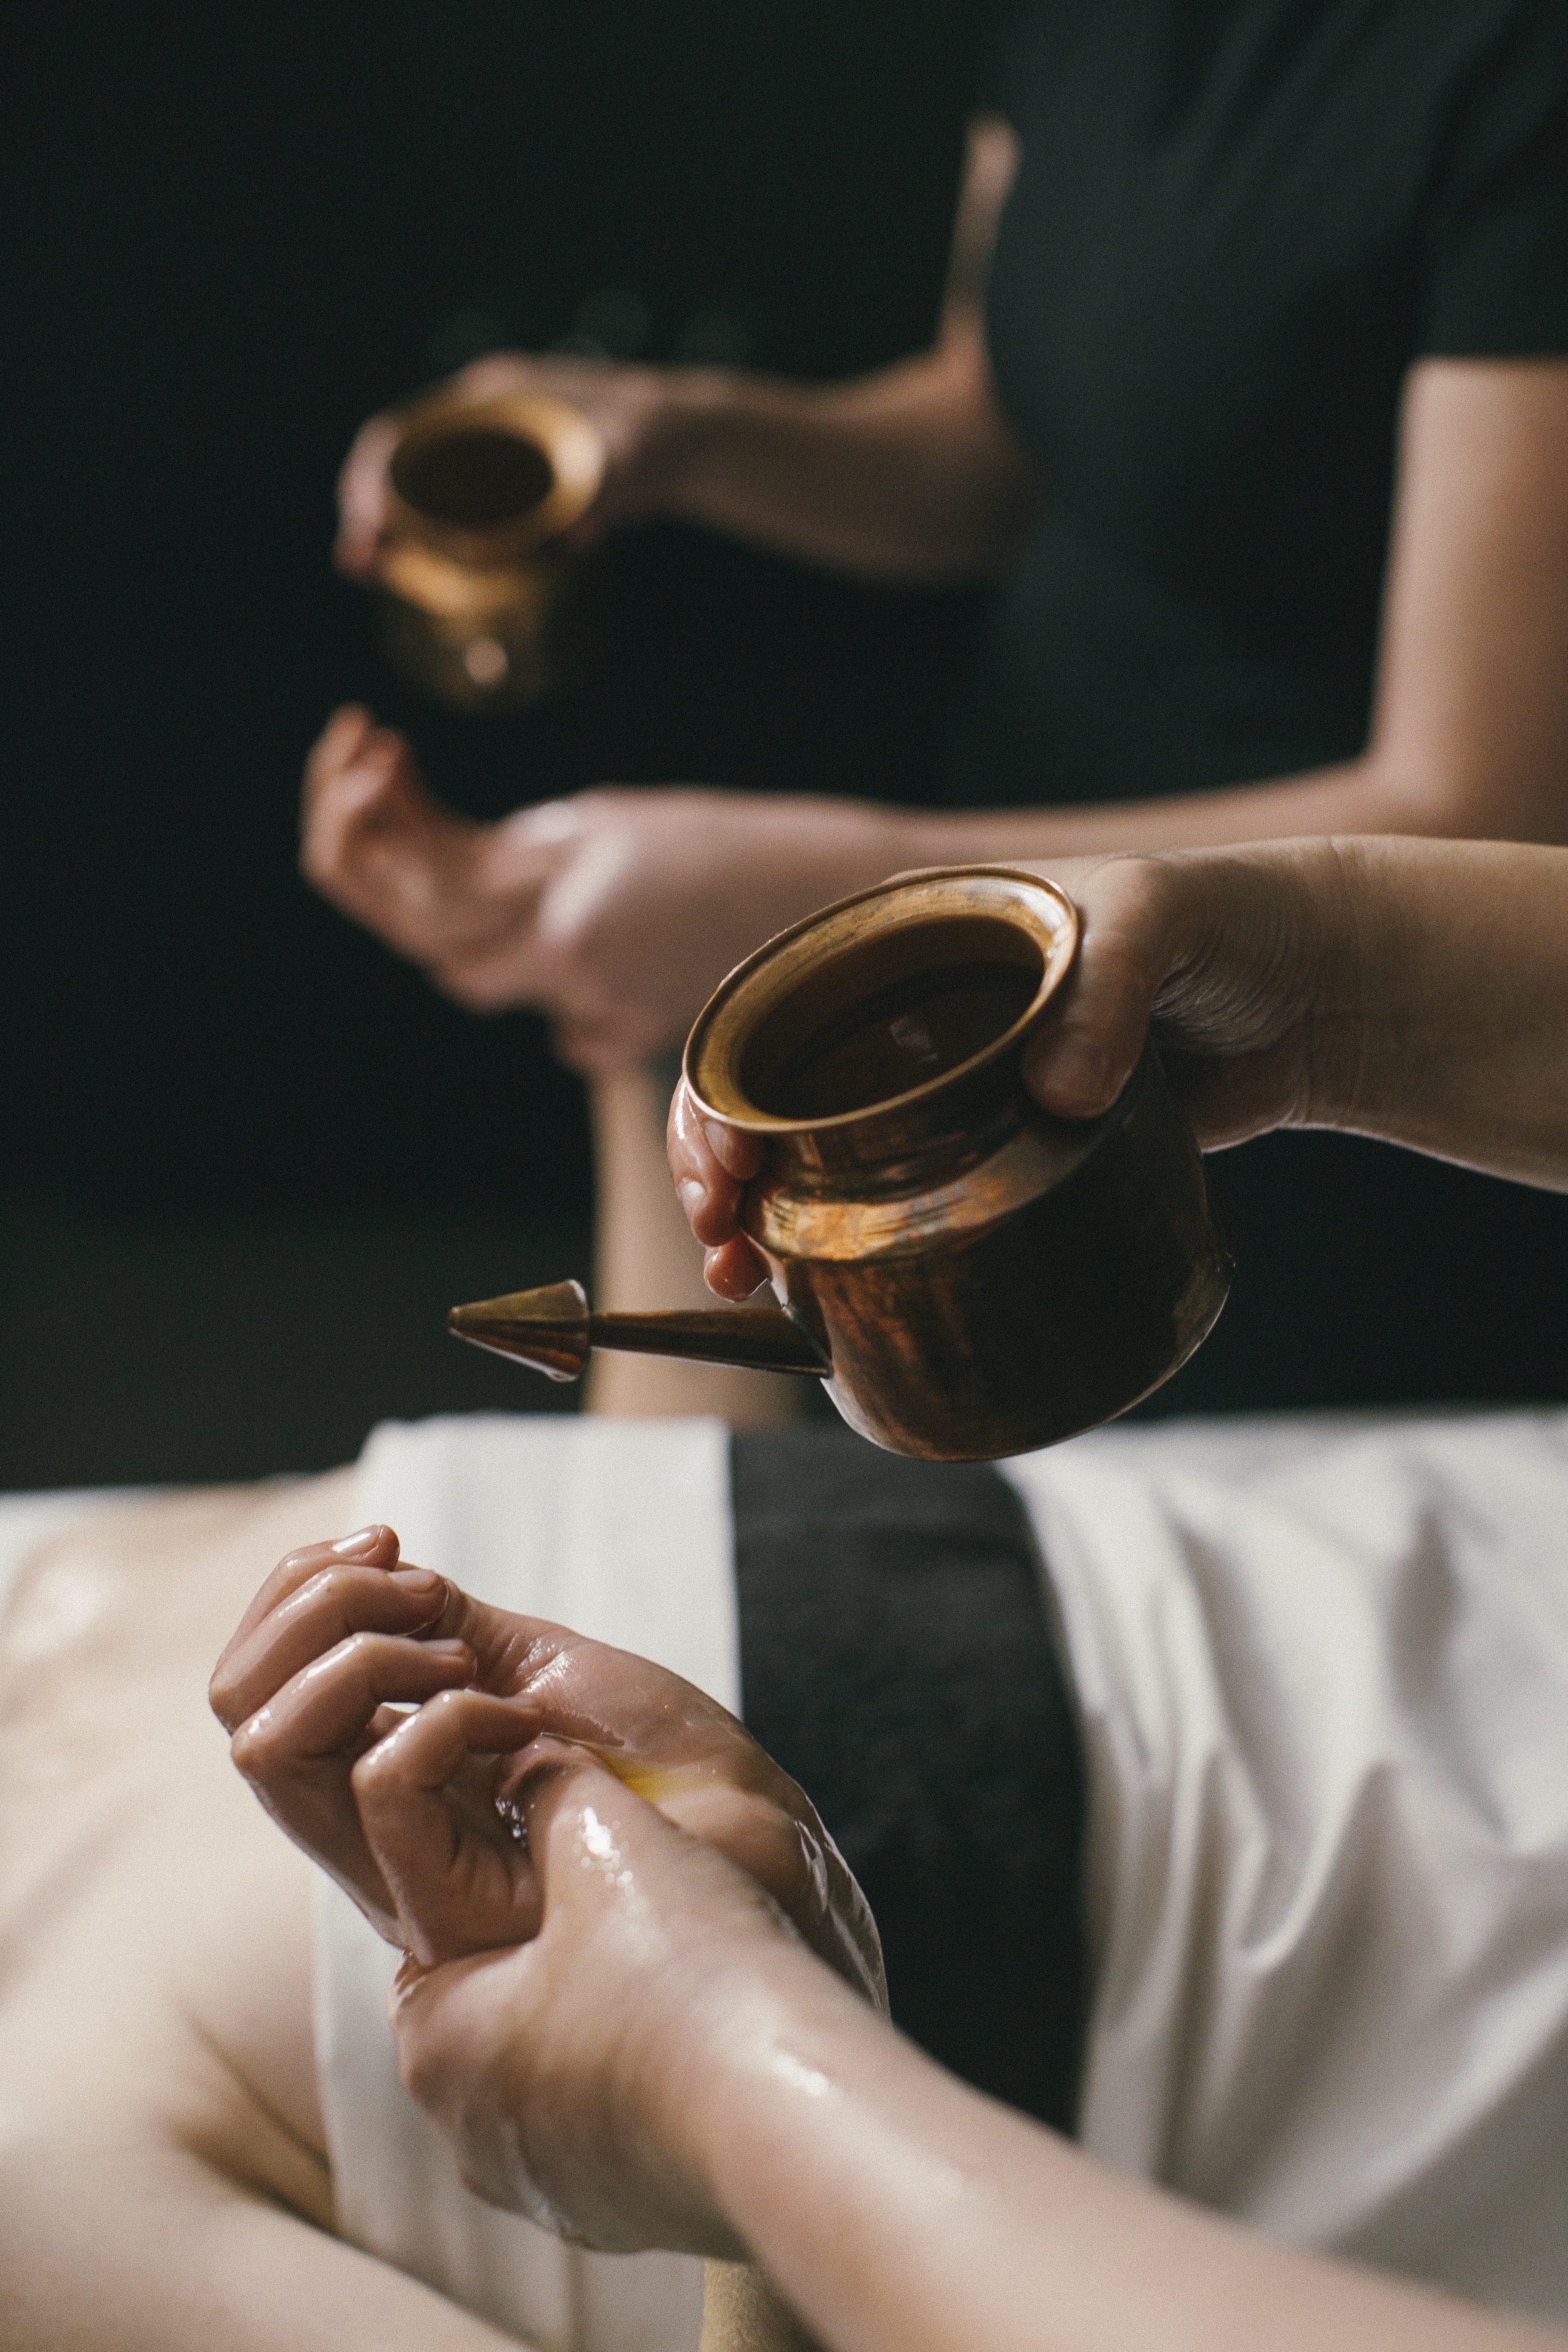 The Ayurvedic natural healing method of warm oil dripping is used during the Lush Karma spa treatment, which aims to relax the body through massage and help jettison karma that may be troubling you.